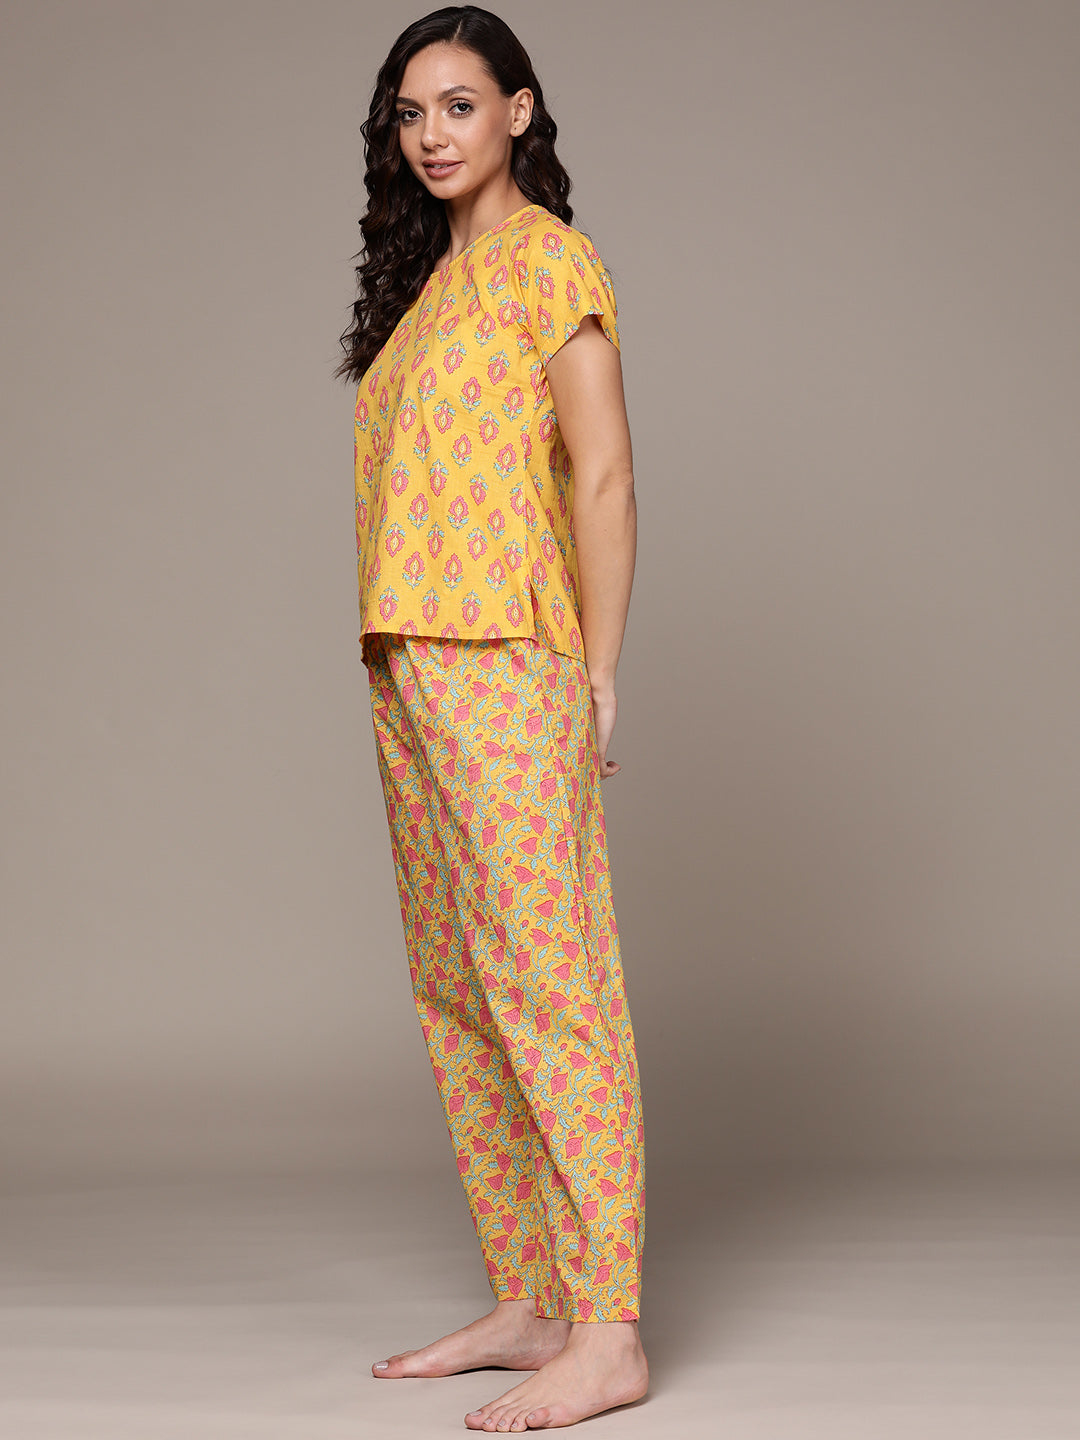 Women's's Yellow Floral Printed Pure Cotton Night Suit